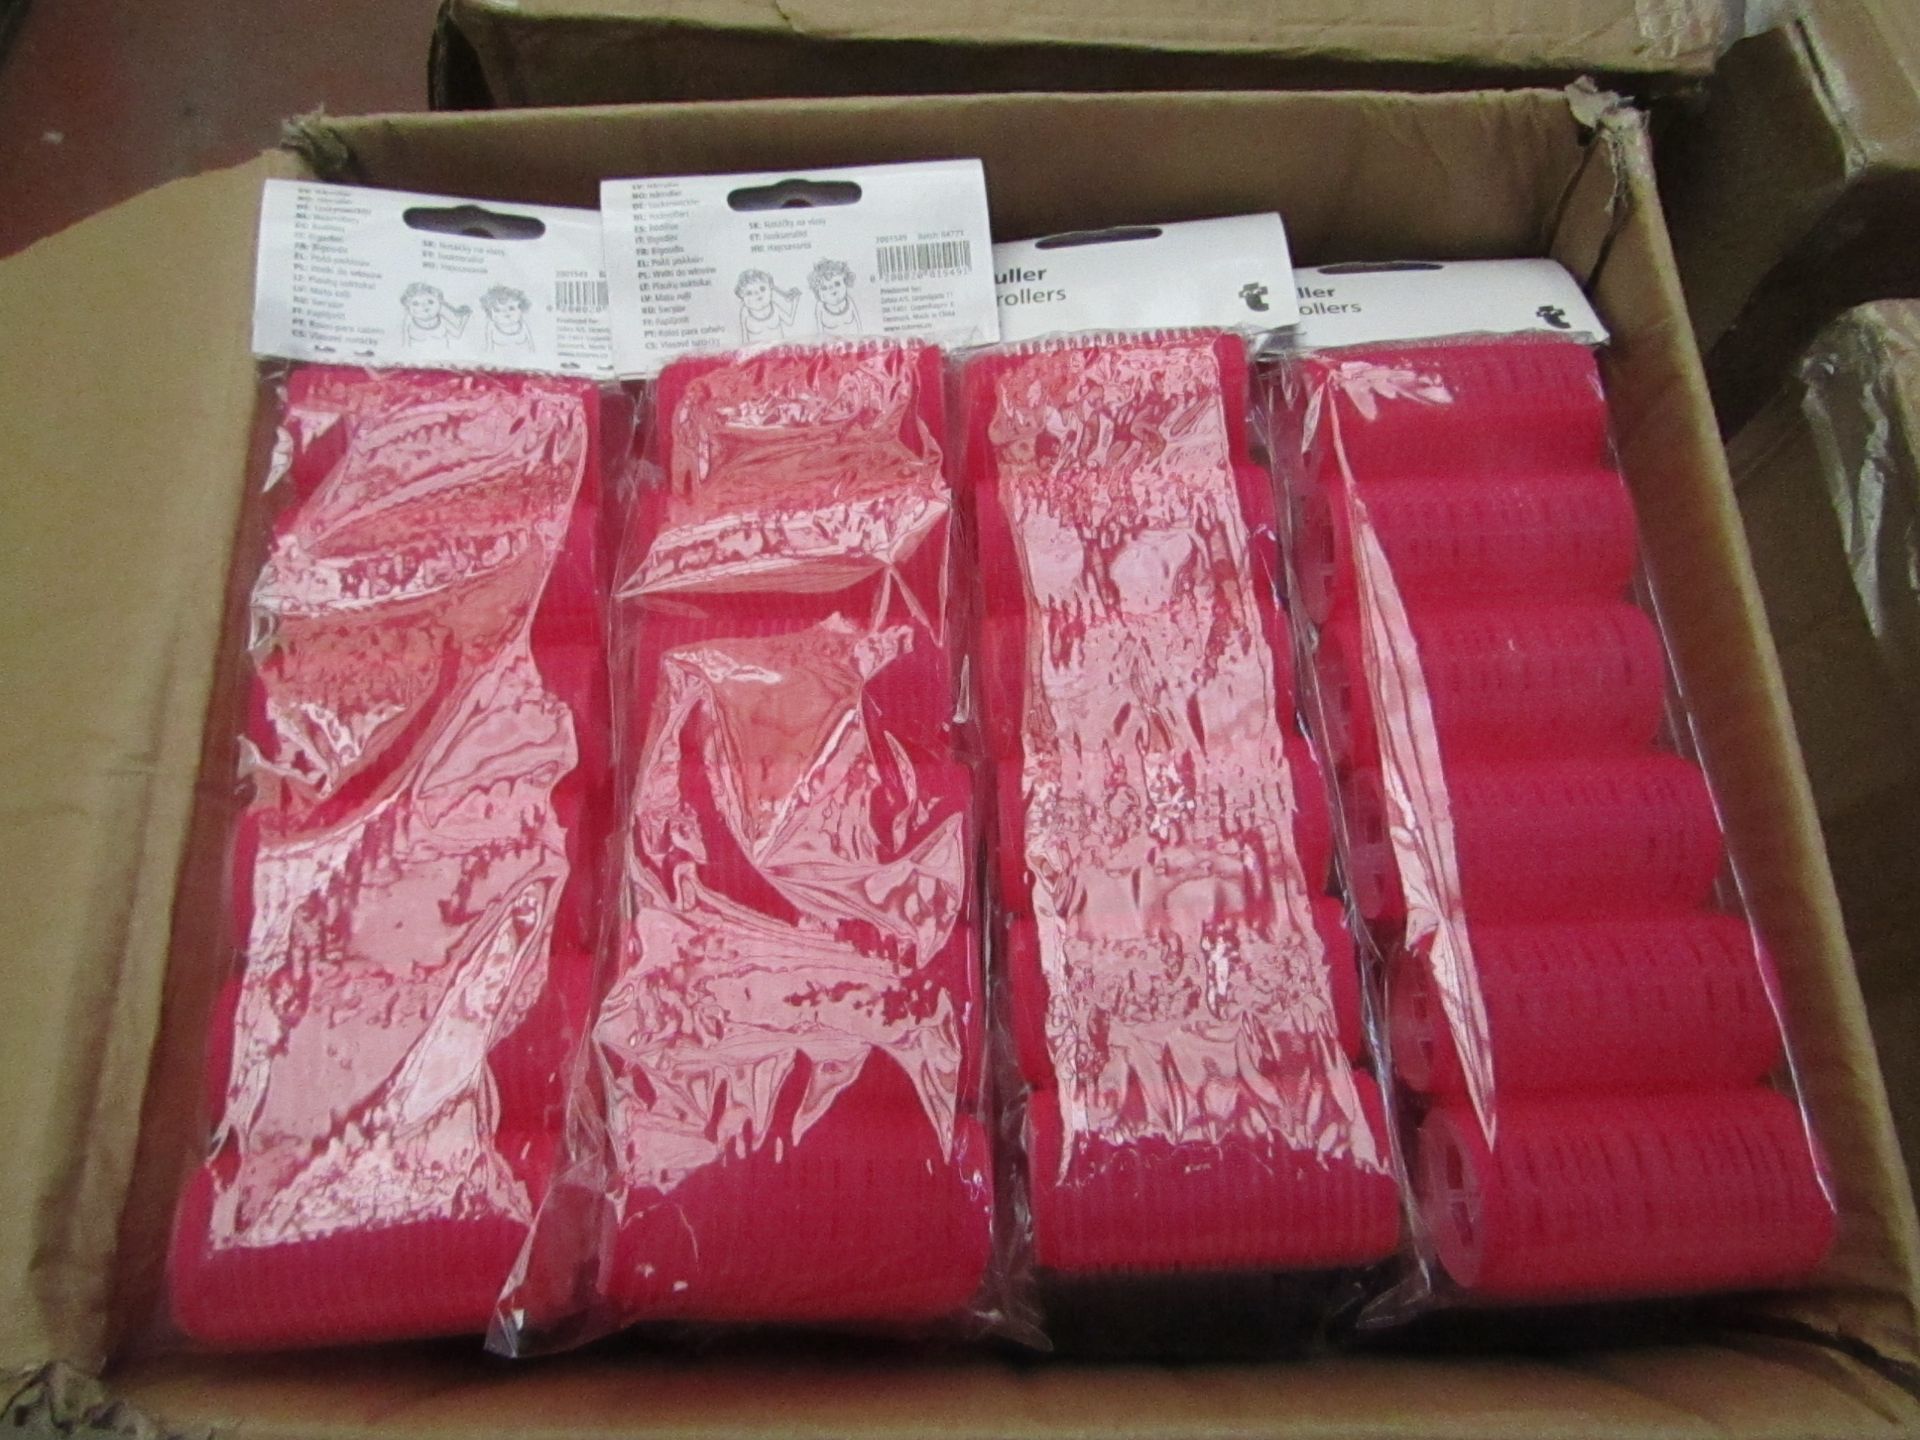 2x Boxes each containing 24 pink hair rollers, all new and packaged.